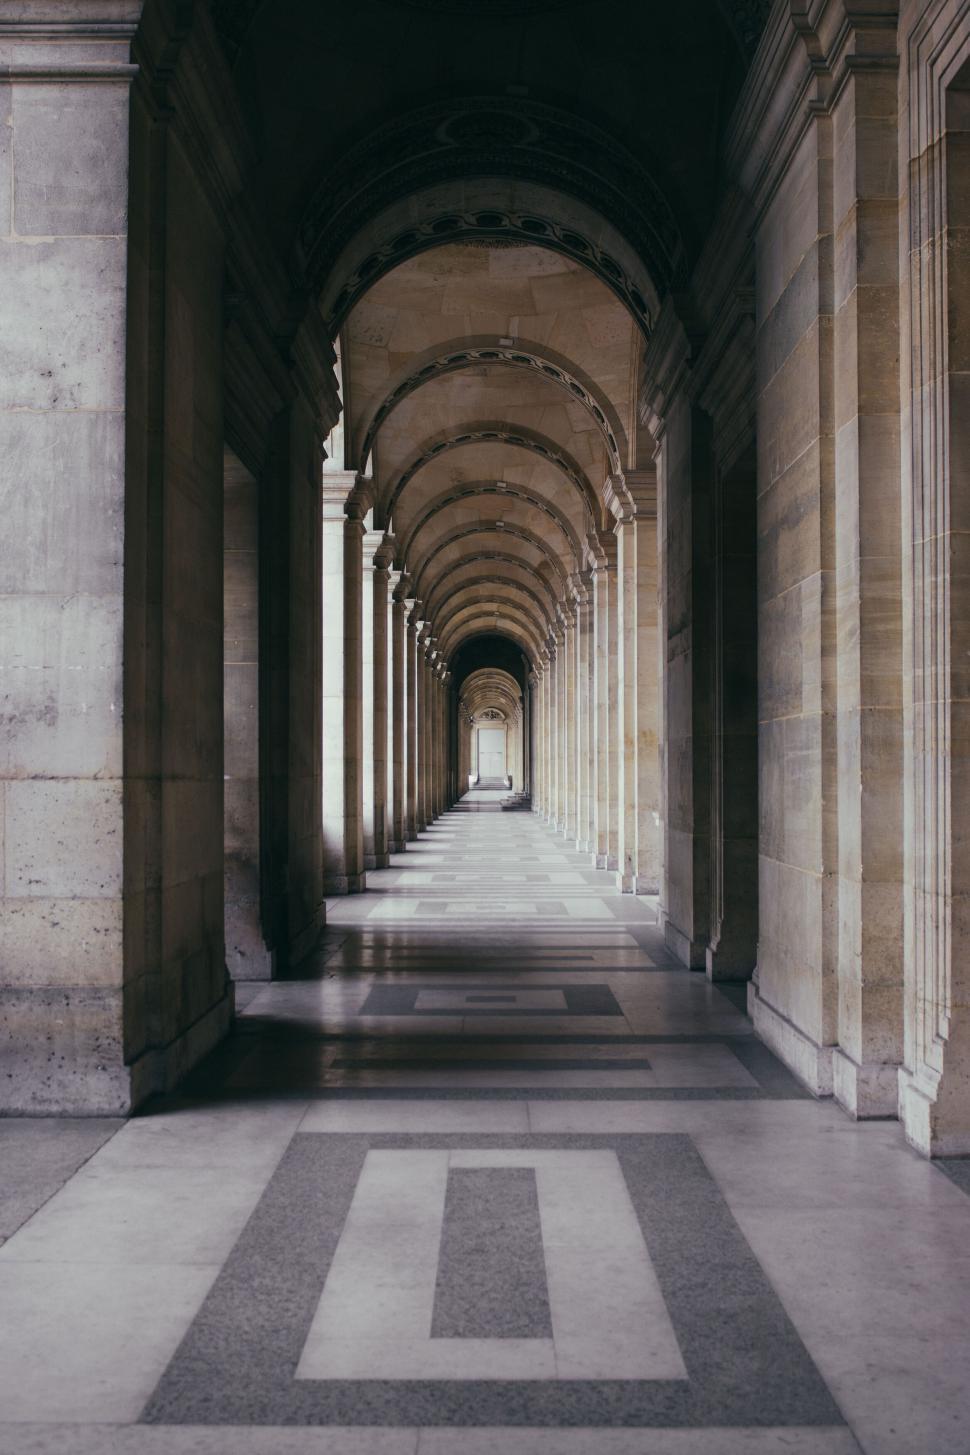 Free Image of A long hallway with arches and columns 